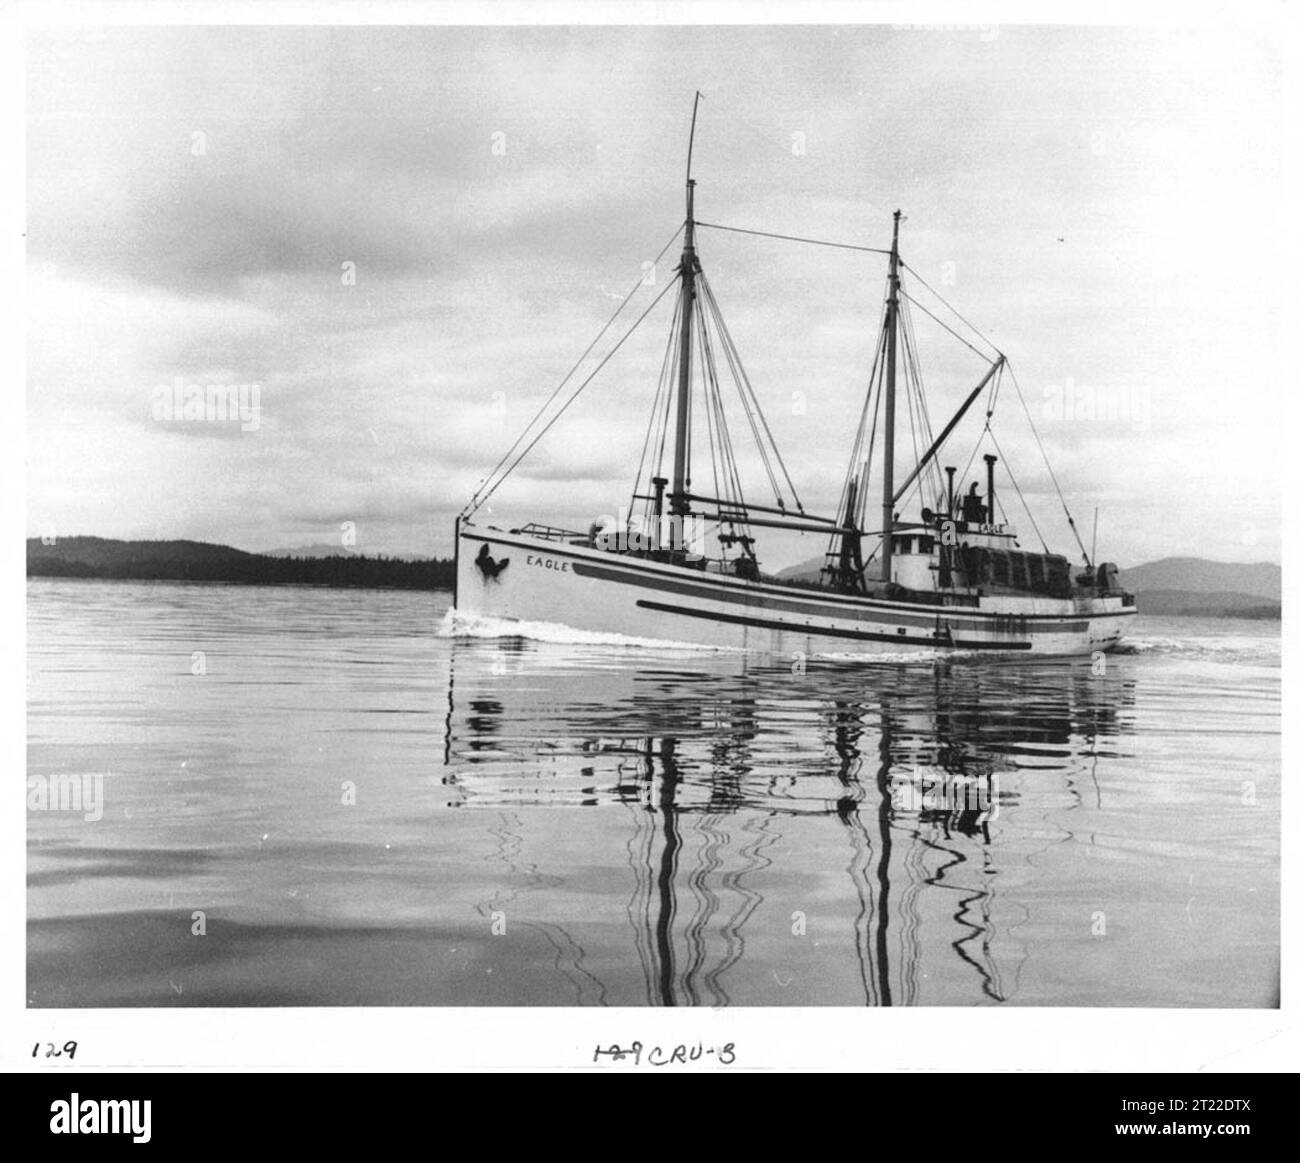 Commercial fishing clothing Black and White Stock Photos & Images - Alamy